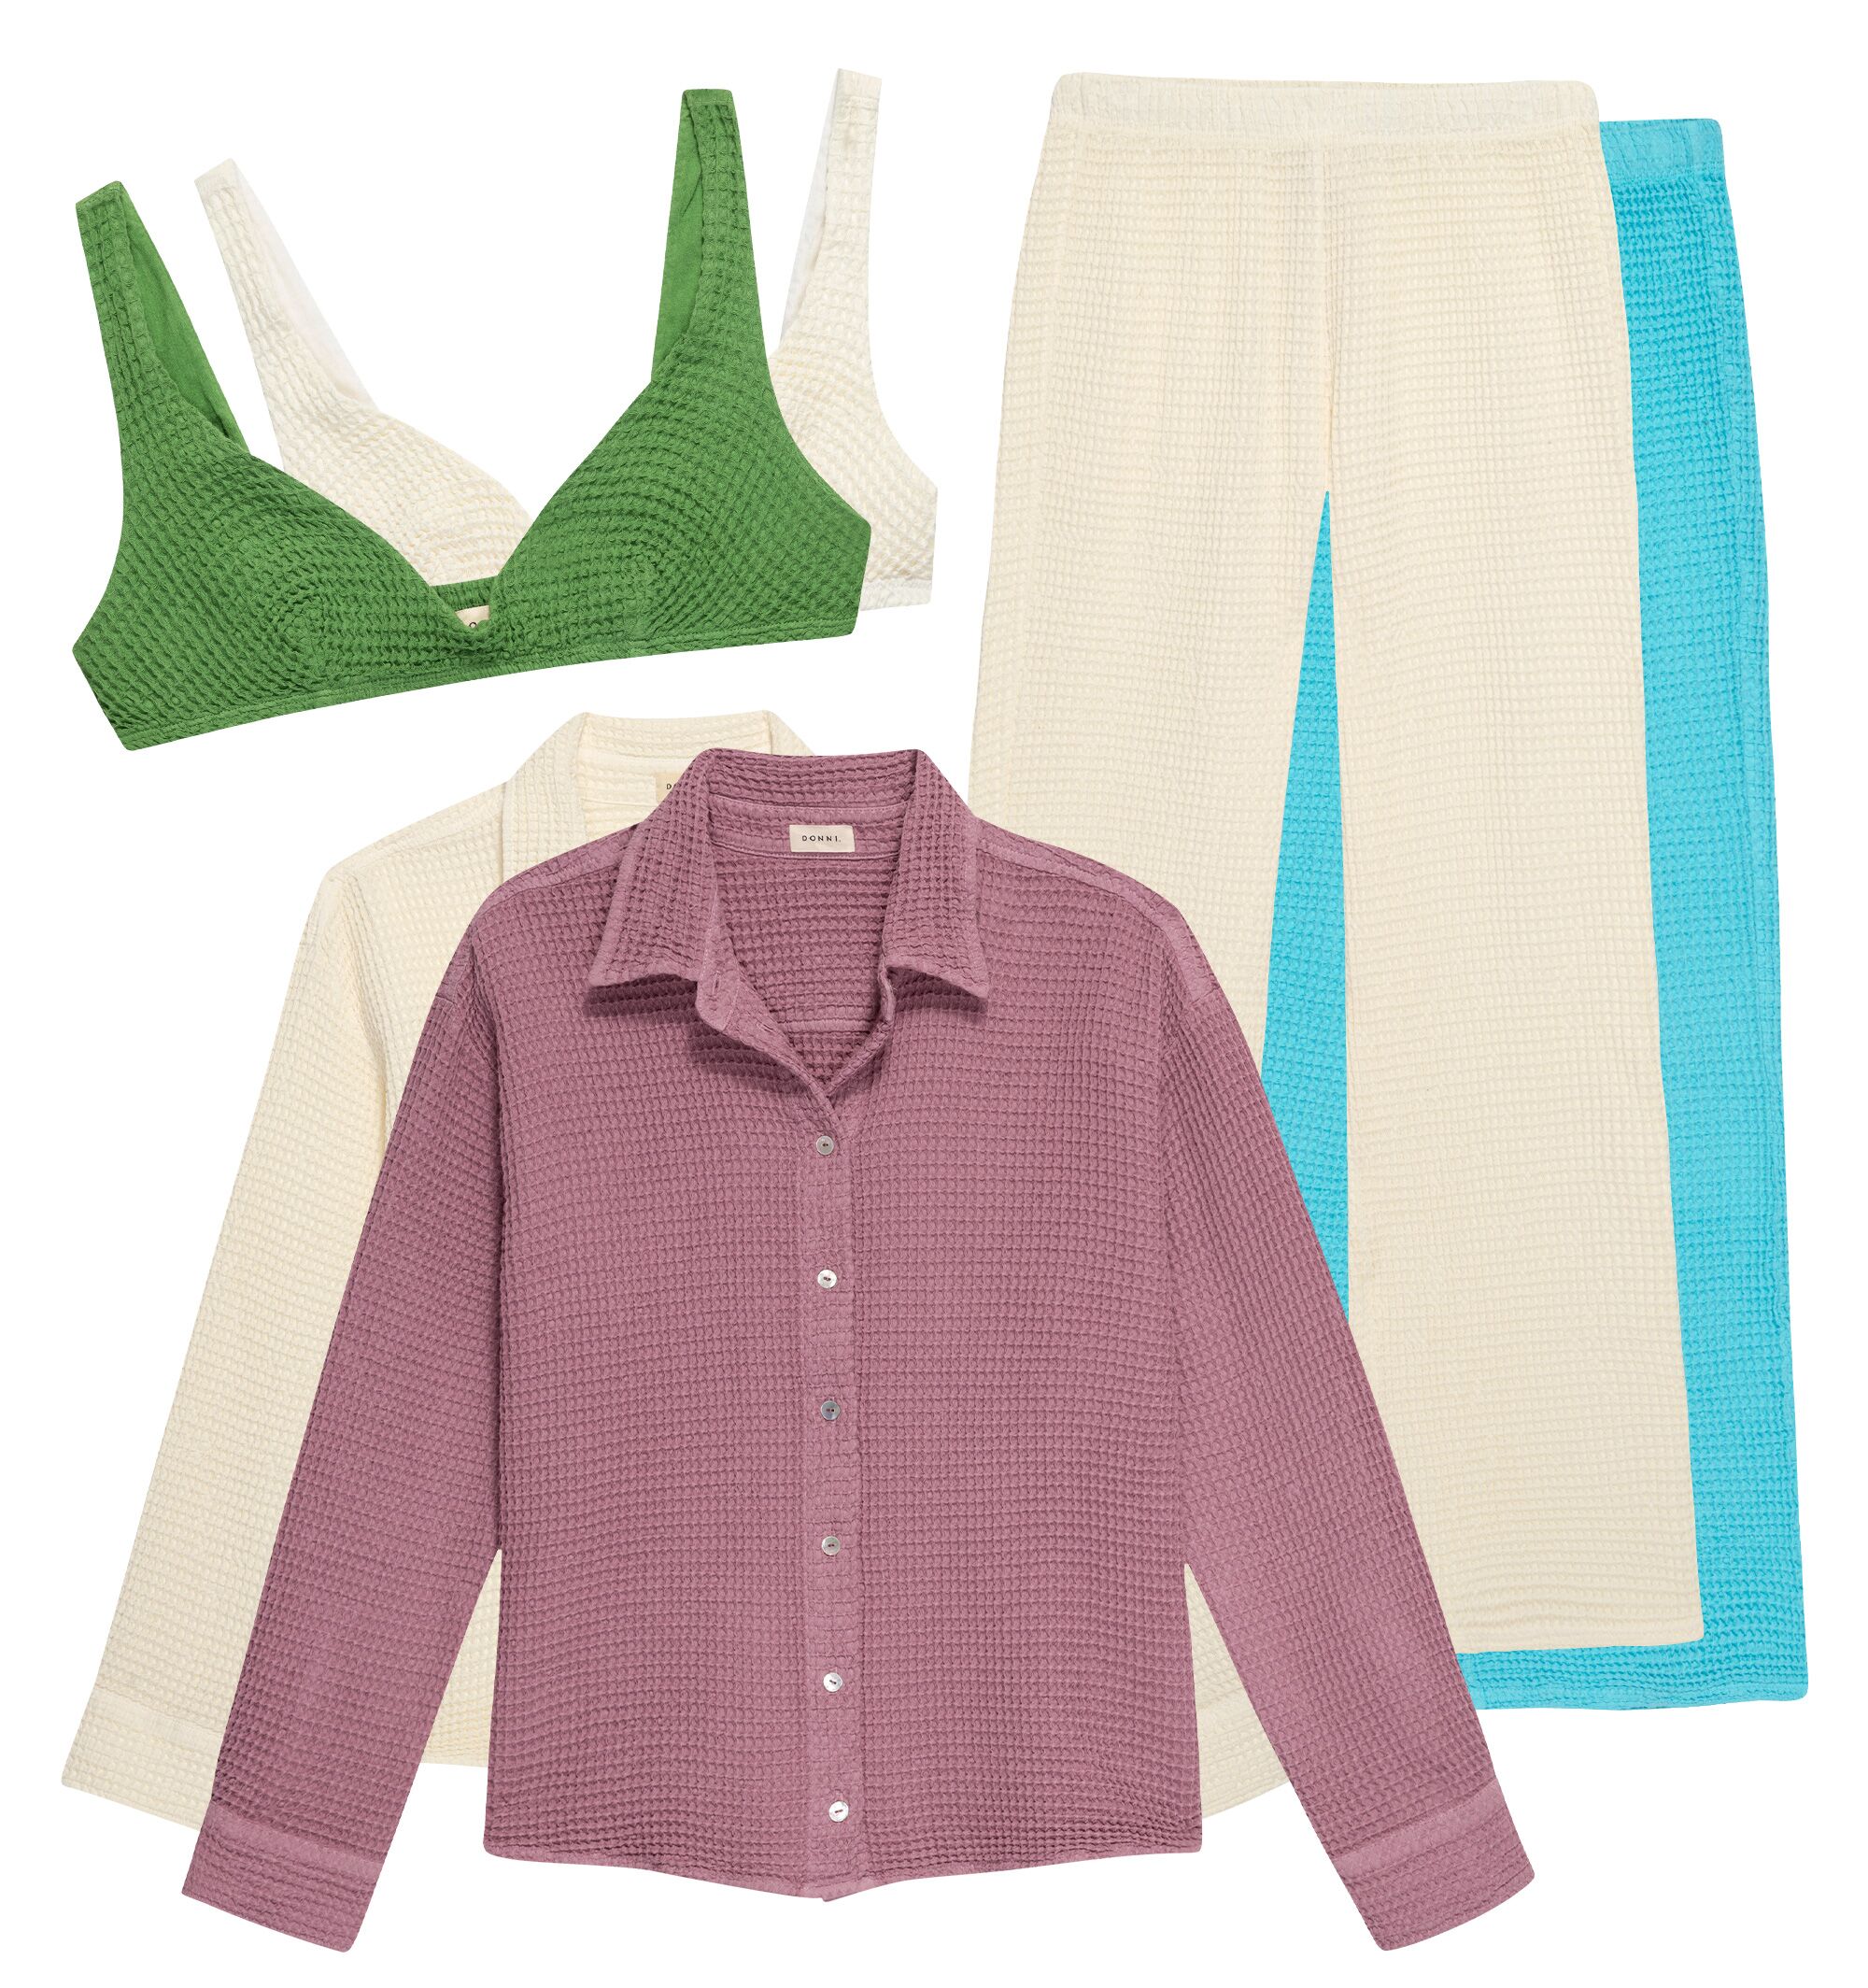 A green bra top and a lavender long-sleeved button-down shirt.